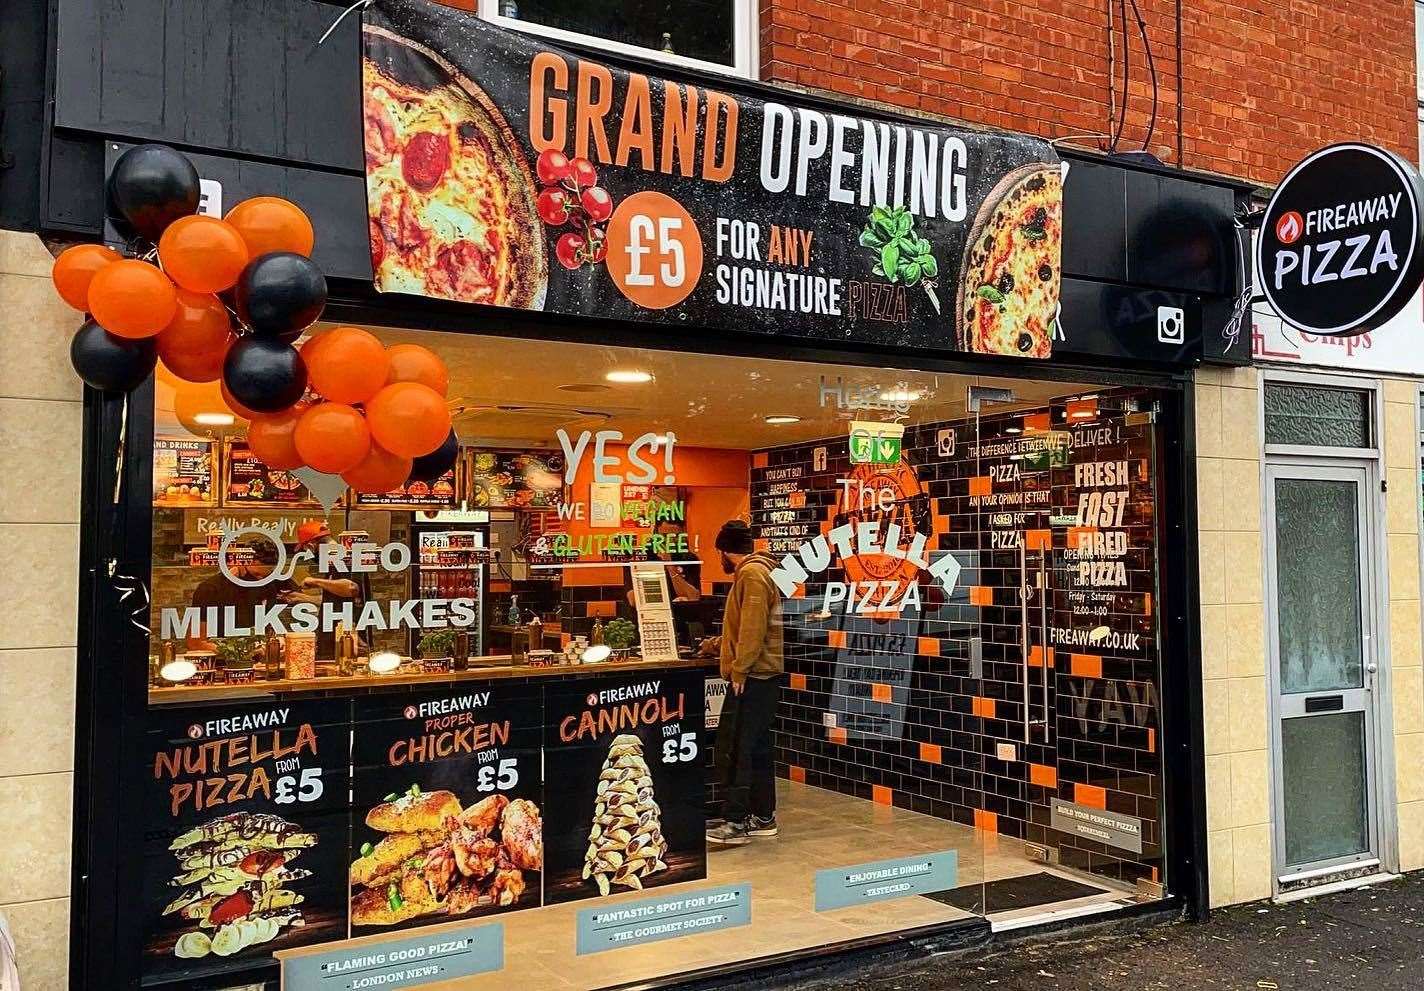 A new branch of Fireaway takeaway pizza opened in Sidcup today